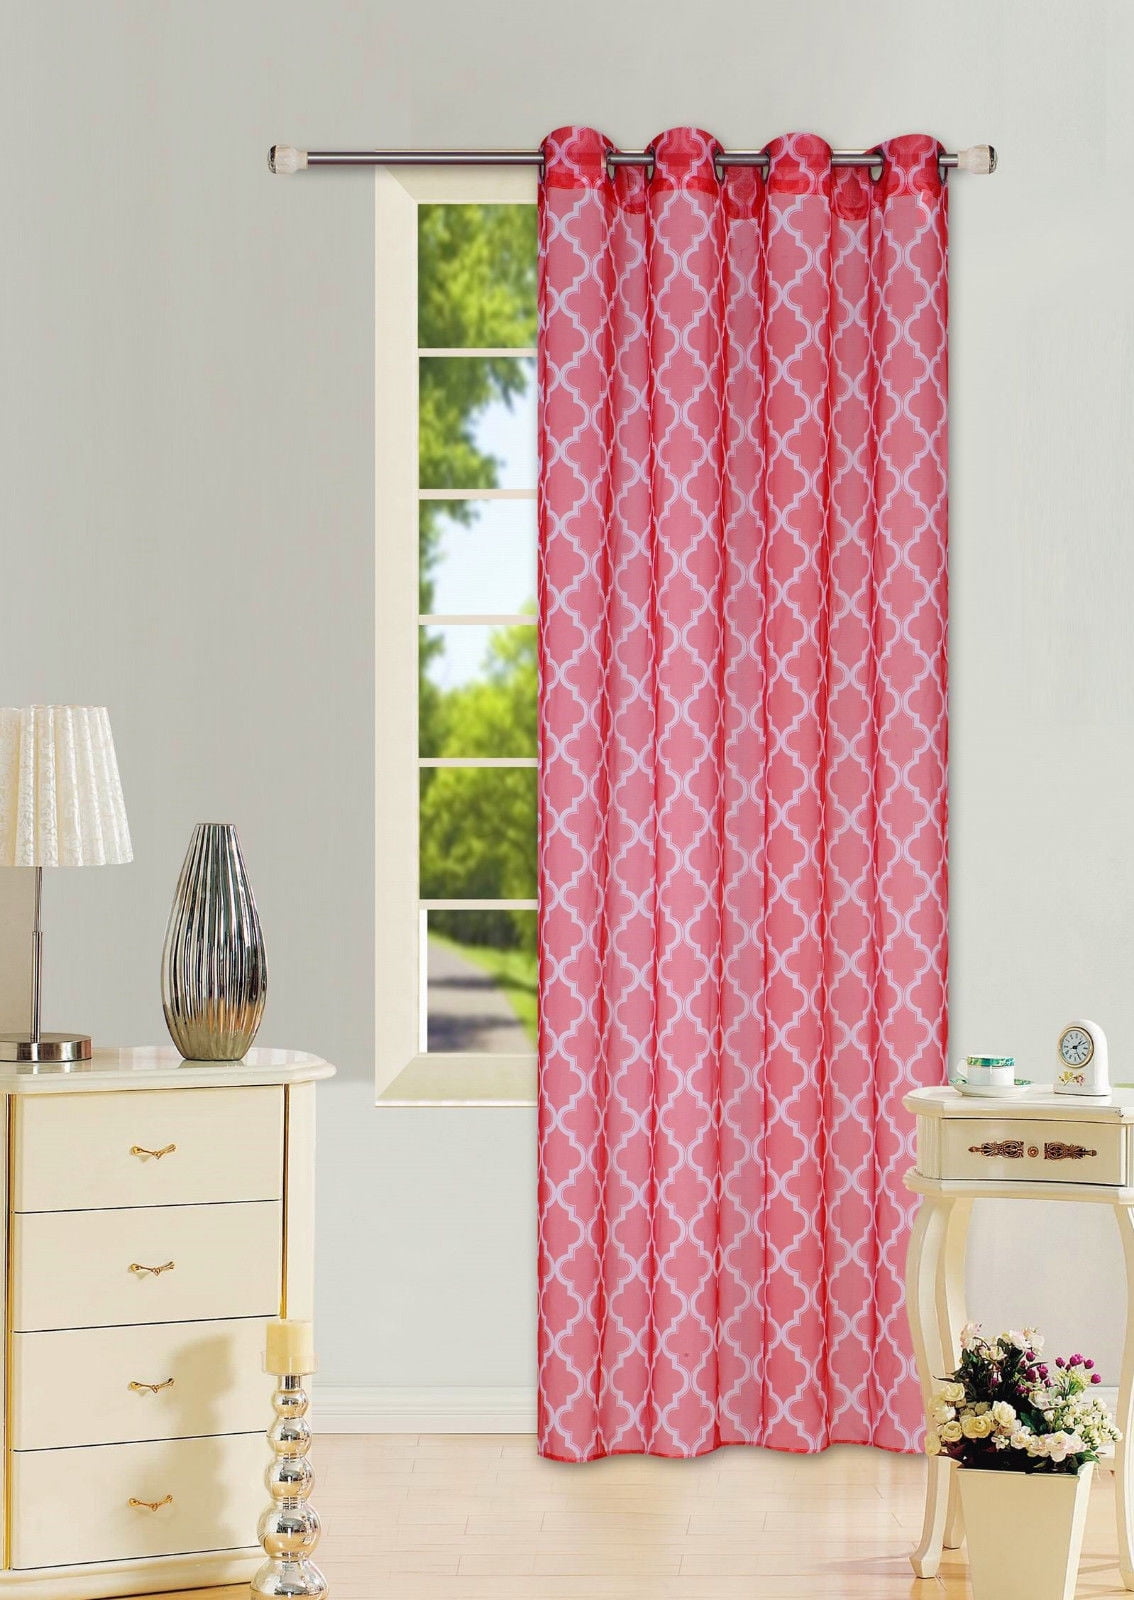 1PC GROMMET VOILE SHEER WINDOW PANEL CURTAIN GEOMETRIC PRINTED RED/WHITE S38 